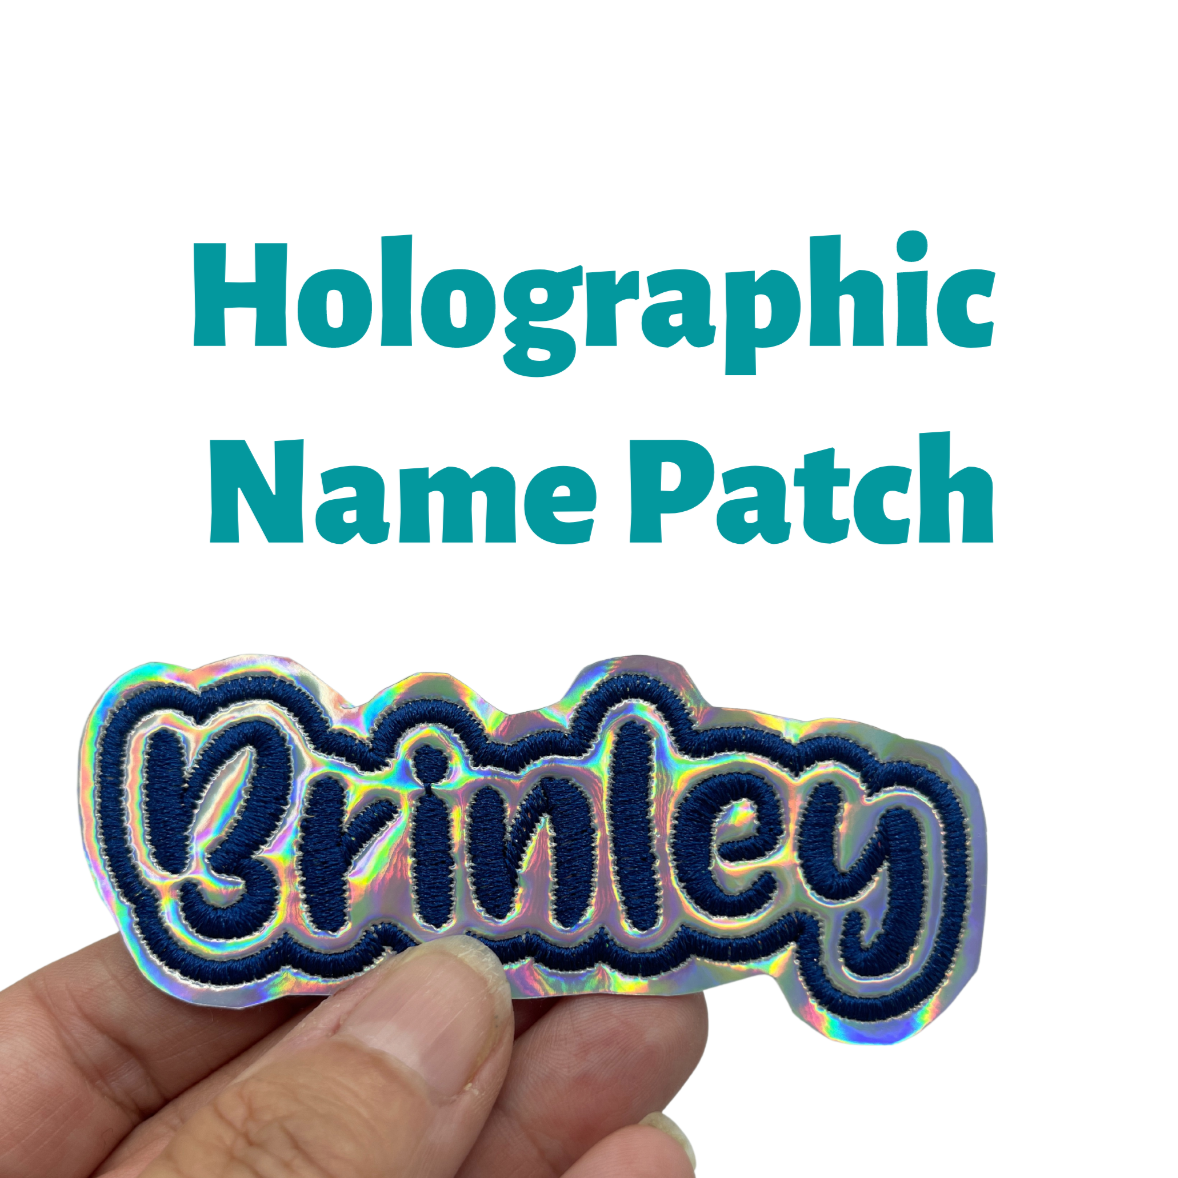 Holographic name patch personalized embroidered